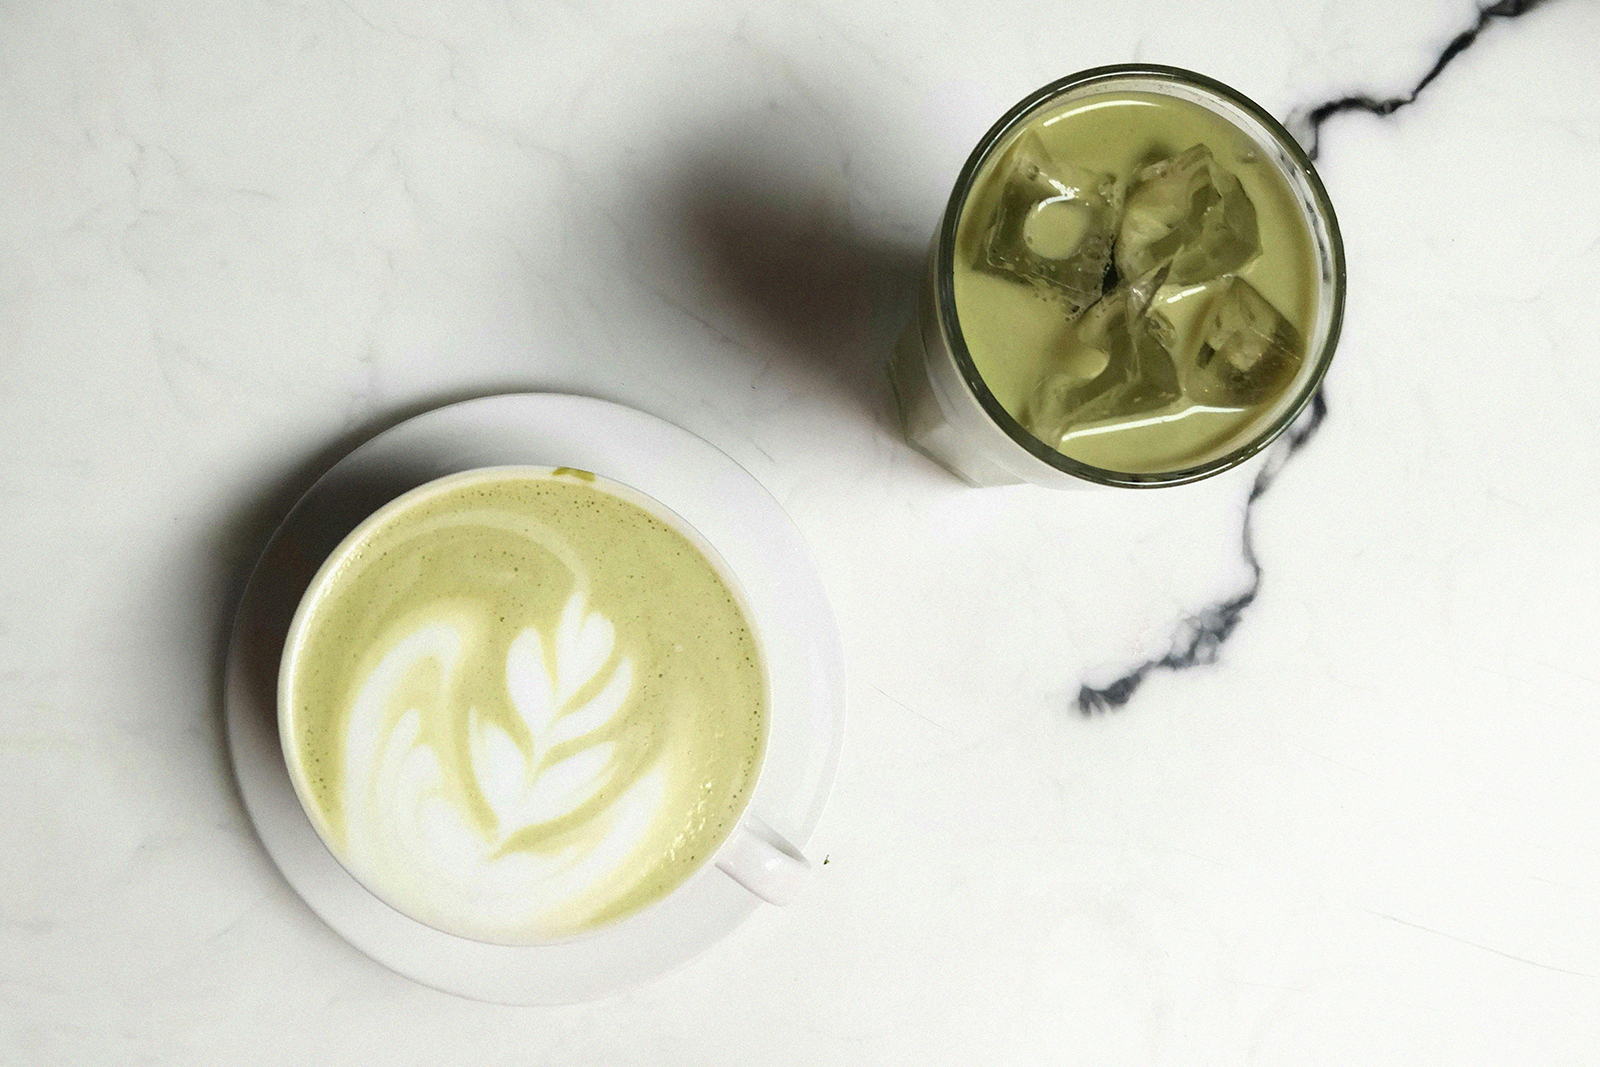 Where to find matcha on the Gold Coast